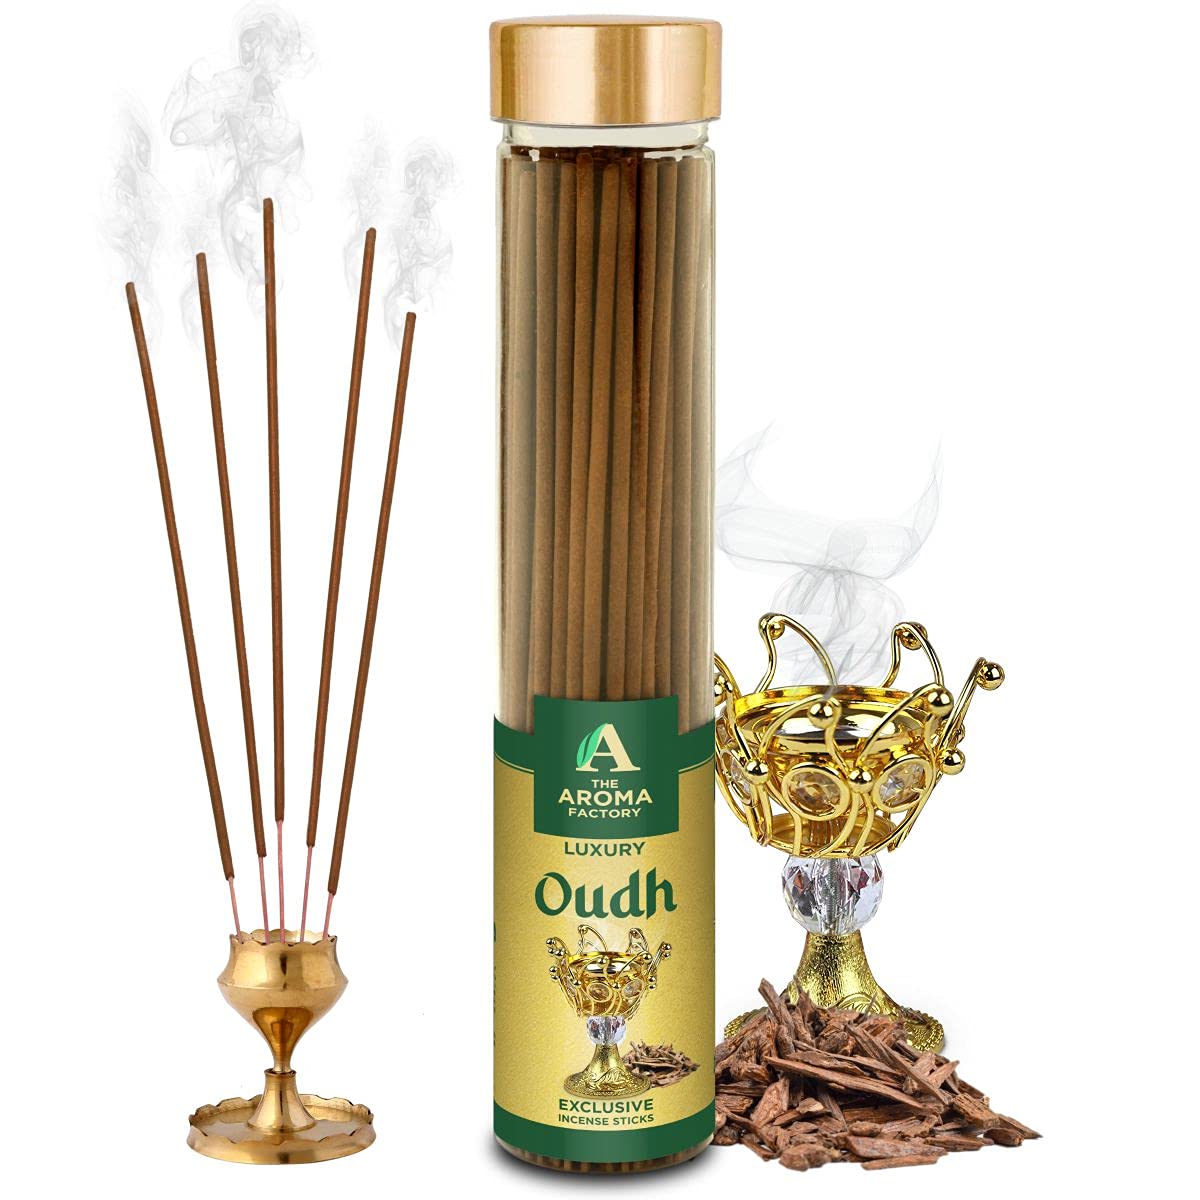 The Aroma Factory Oudh Agarbatti for Pooja, Luxury Incense Sticks, Low Smoke and Zero Charcoal, Premium and Fresh Fragrance for Home, Meditation (Bottle Pack of 1, 100g)